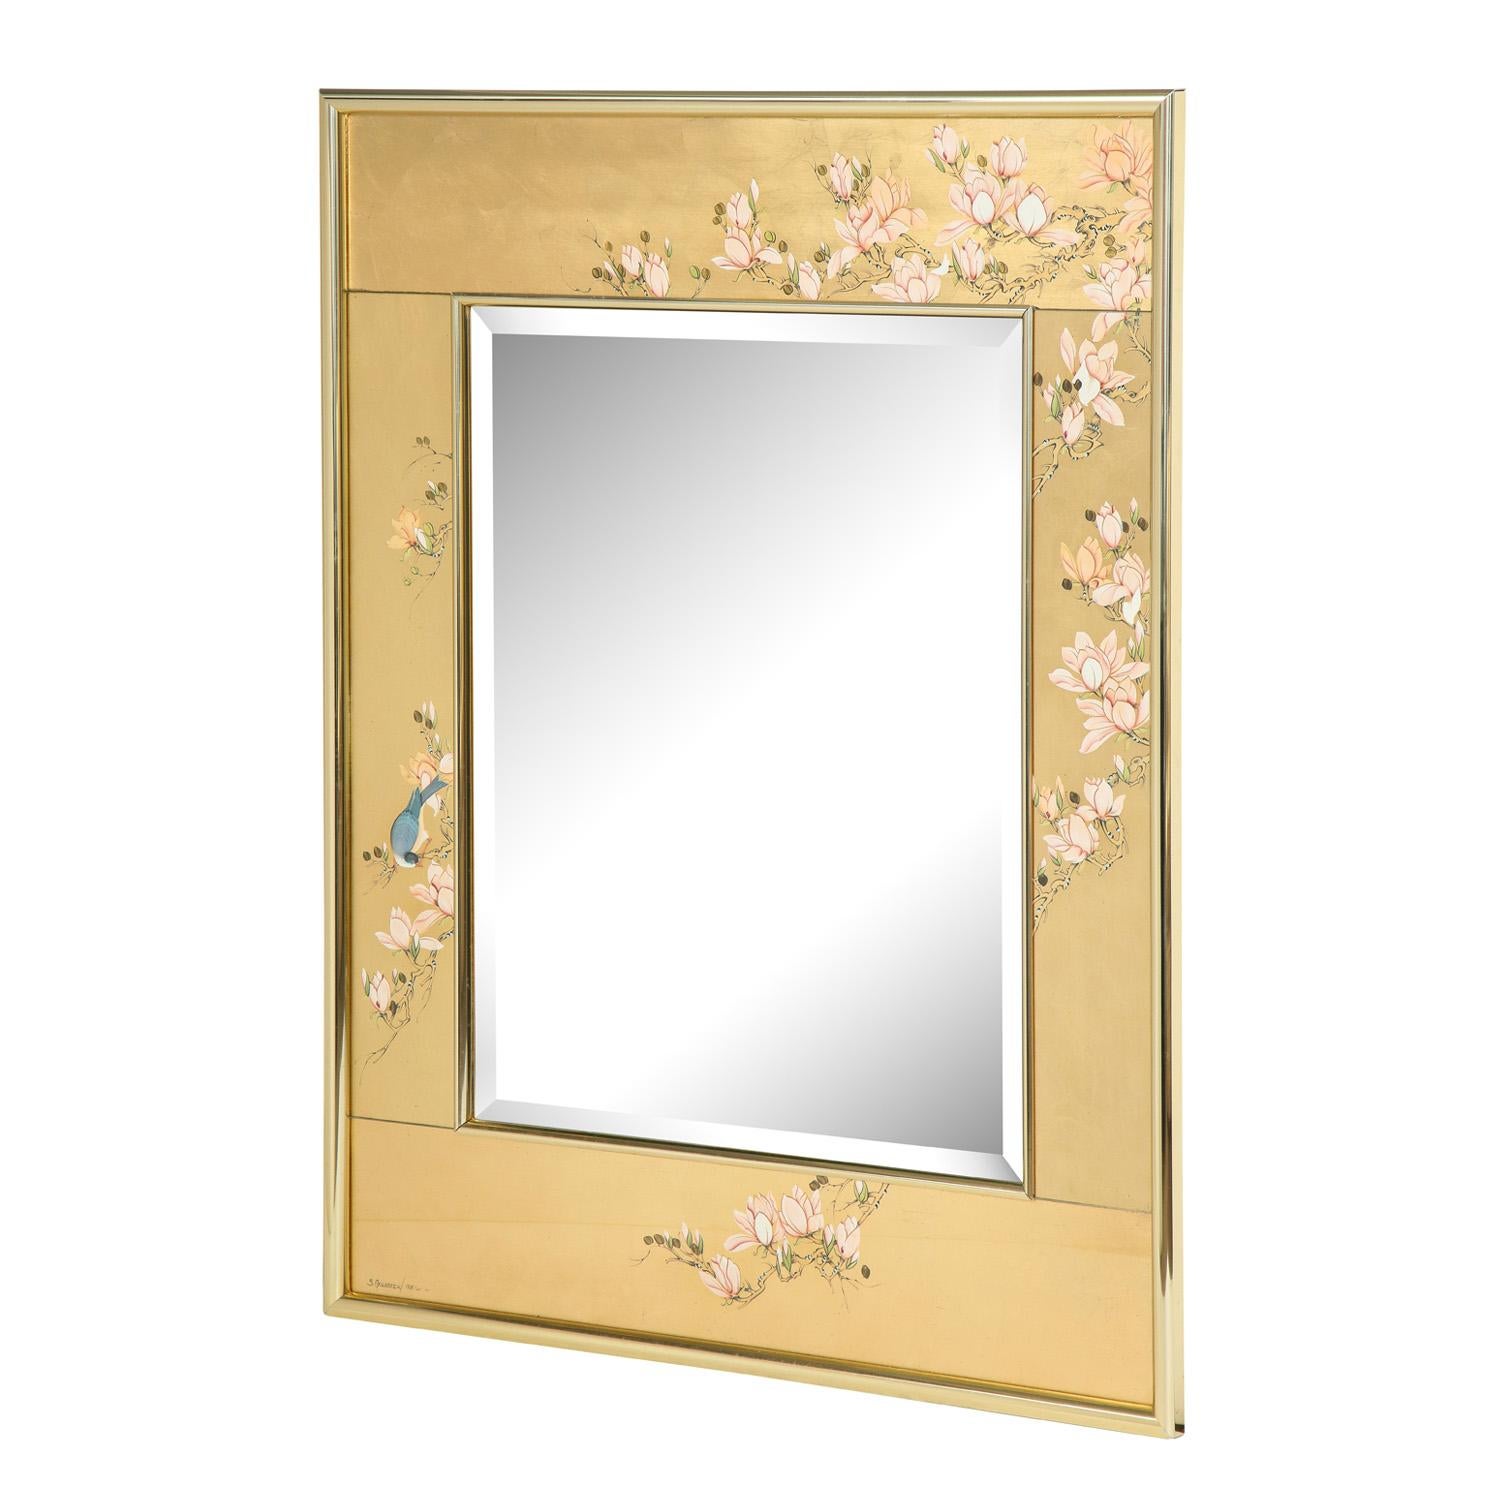 Artisan reverse painted mirror, gold leaf with flowering magnolia branches and bluebird, by S. Goldstein, American 1988 (signed 